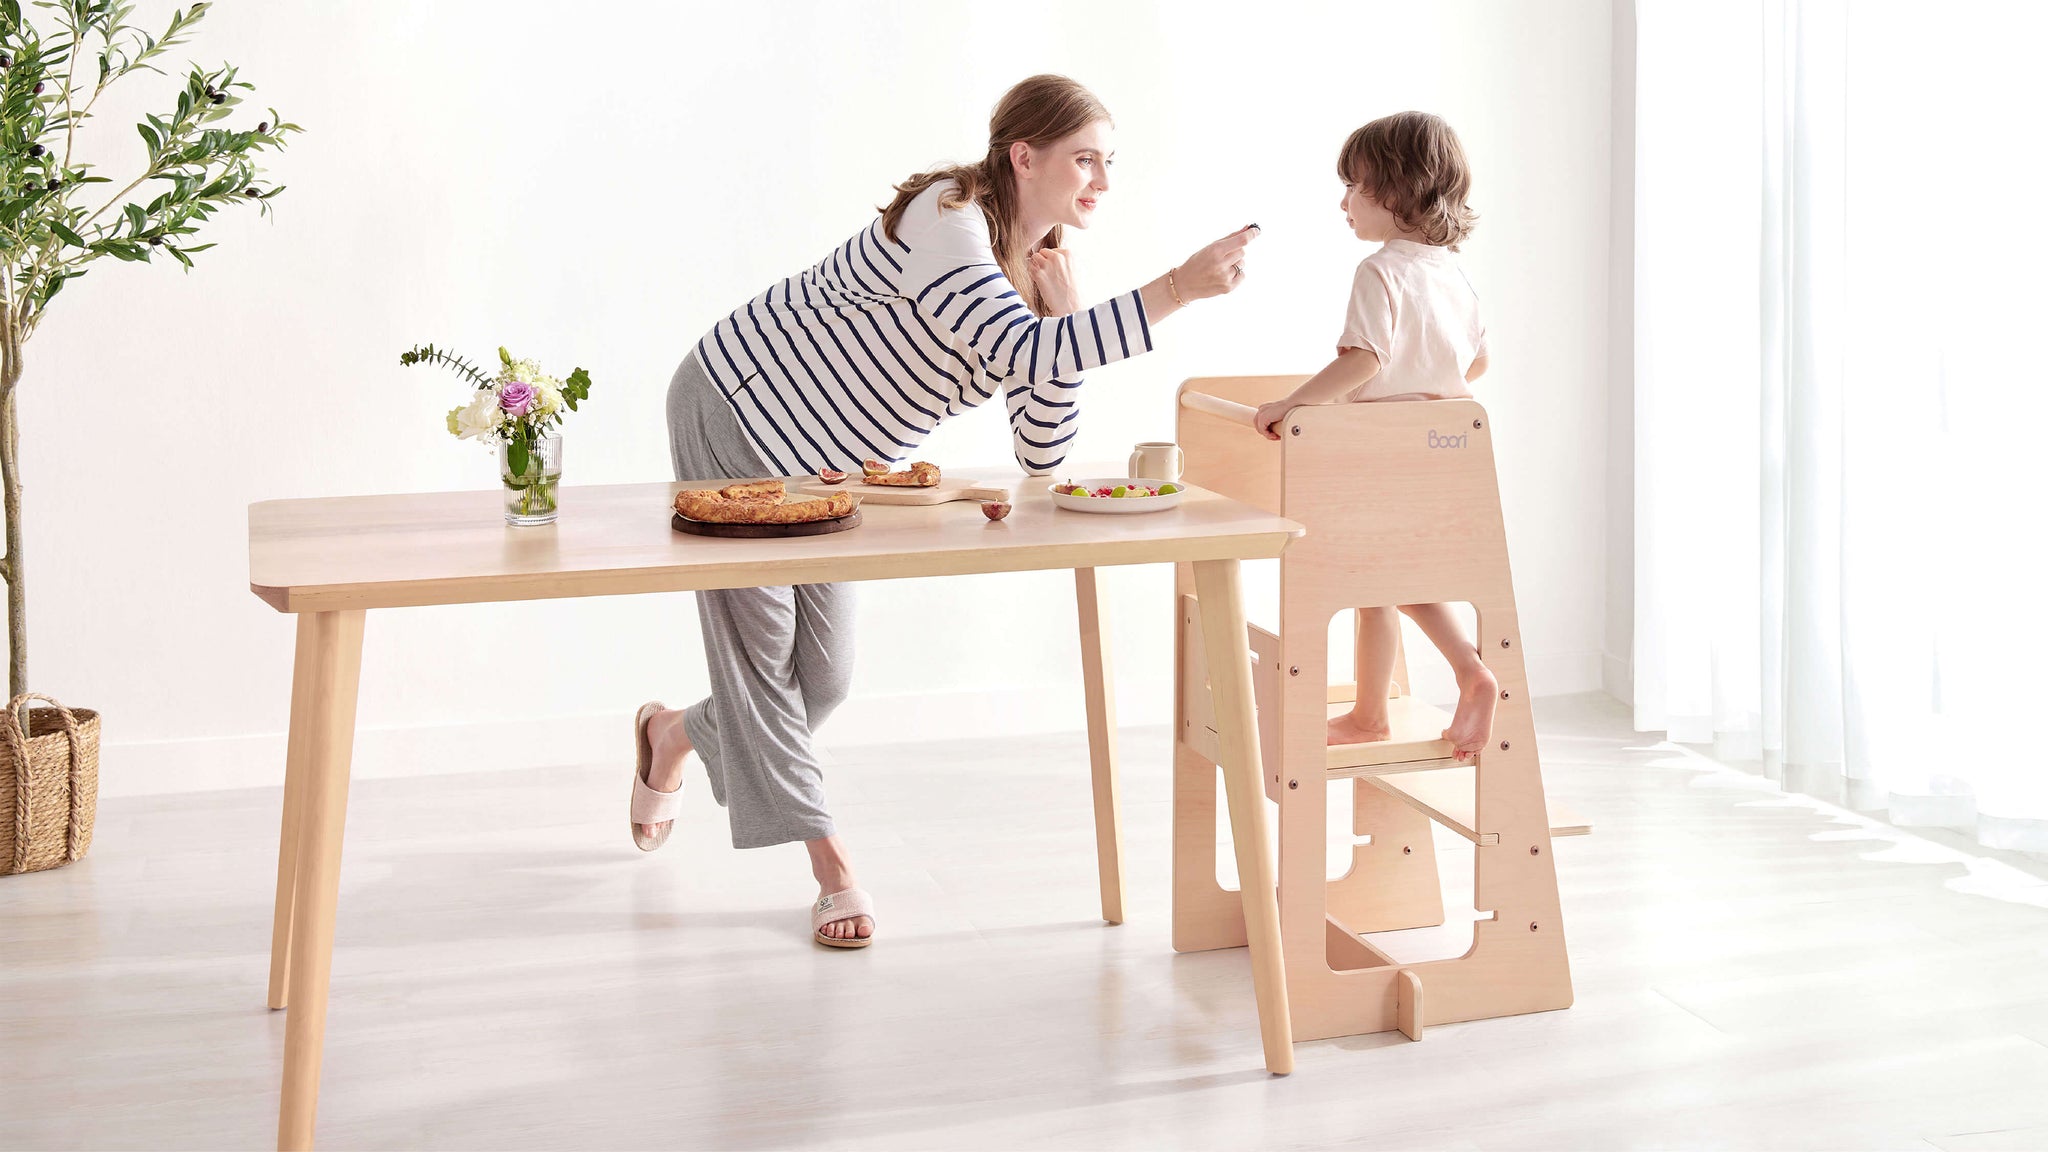 Mum and child at dining table, child using Tidy Learning Tower.